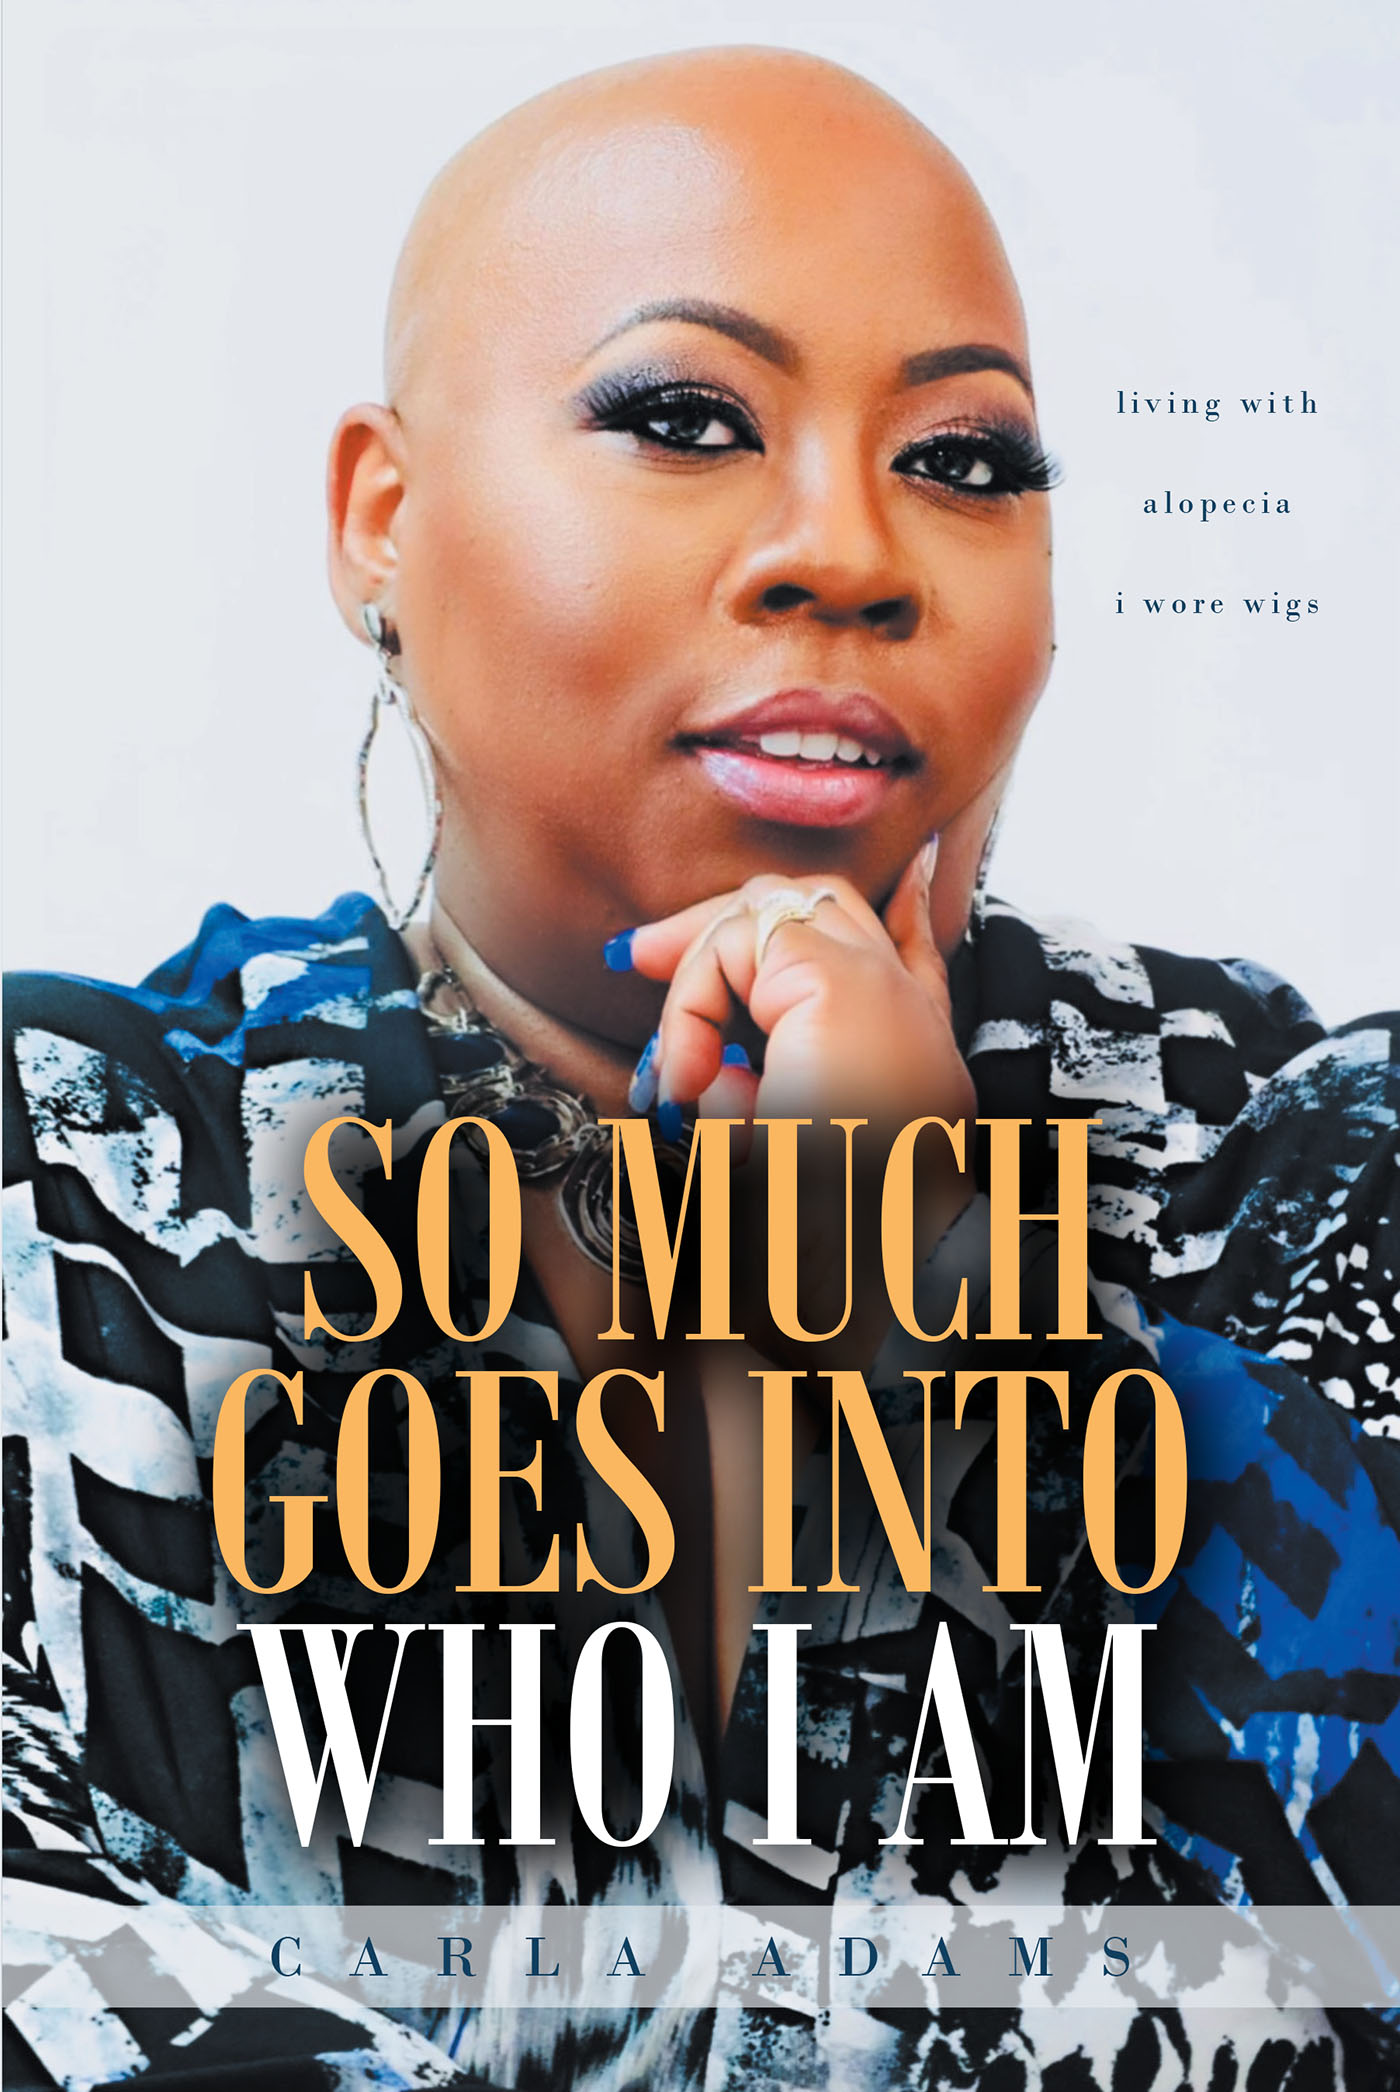 Carla Adams’s New Book, "So Much Goes Into Who I Am," is a Powerful Autobiographical Account of the Author's Life with Alopecia and How She Came to Love Her Baldness